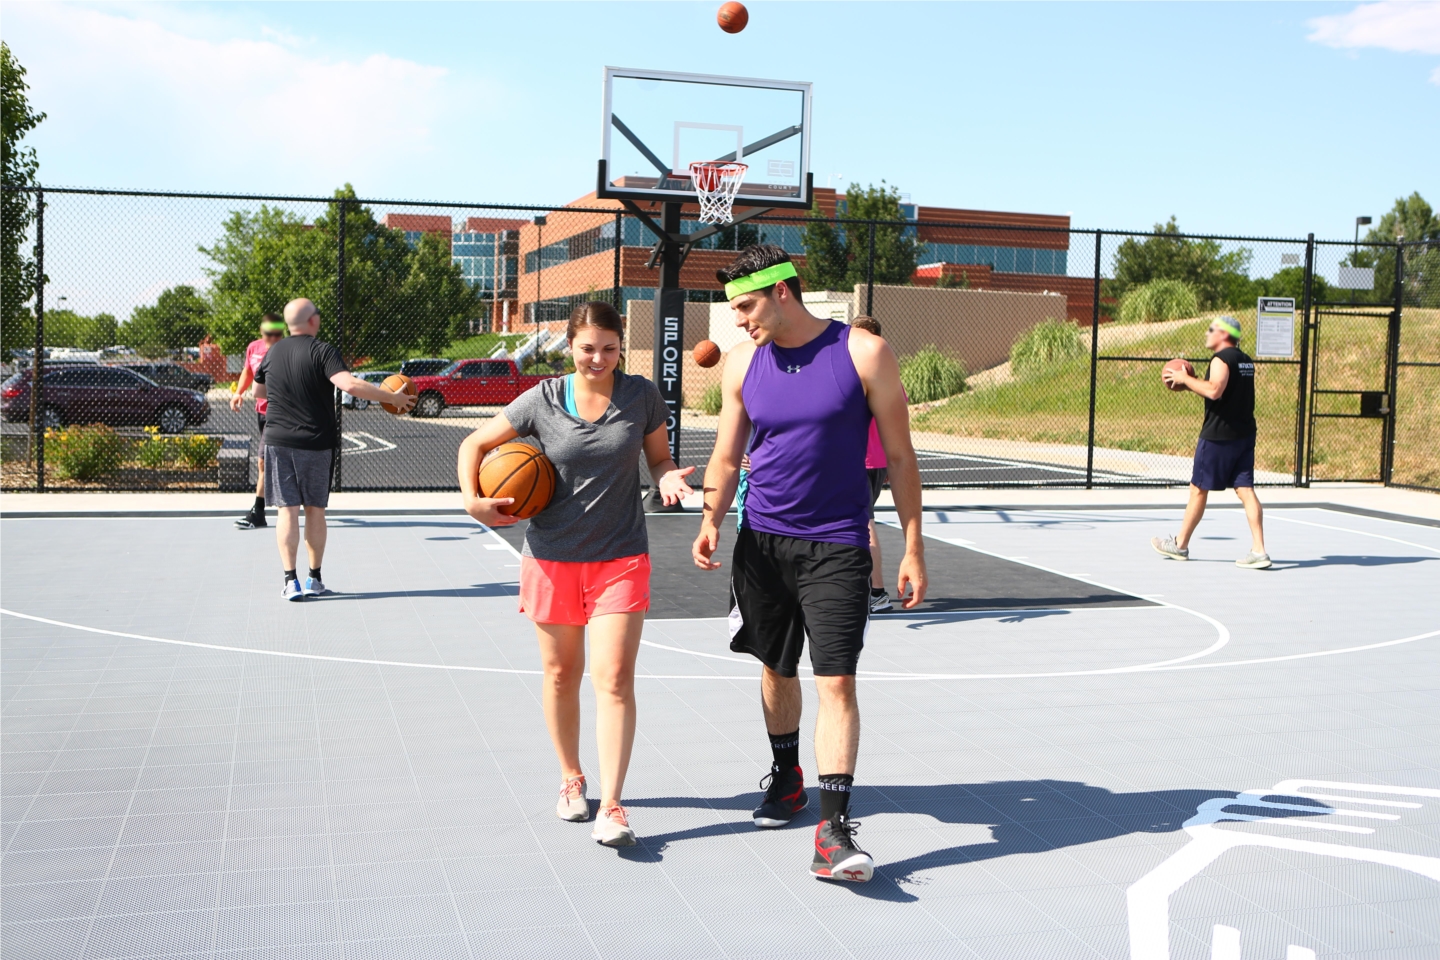 Employees enjoying a game of basketball in the sun. 